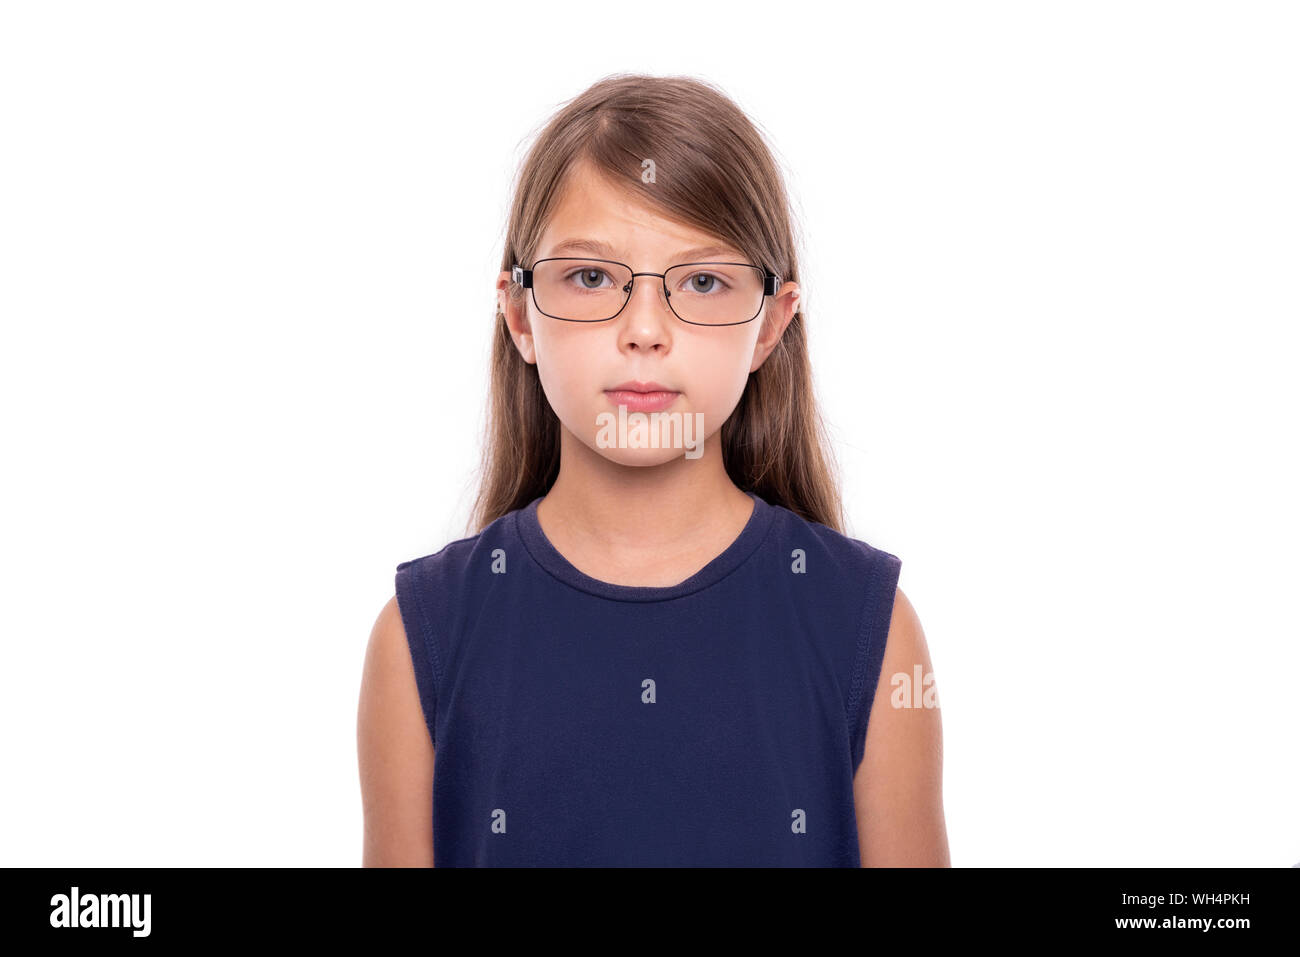 Portrait of a little girl with glasses isolated on white backgroud. Stock Photo